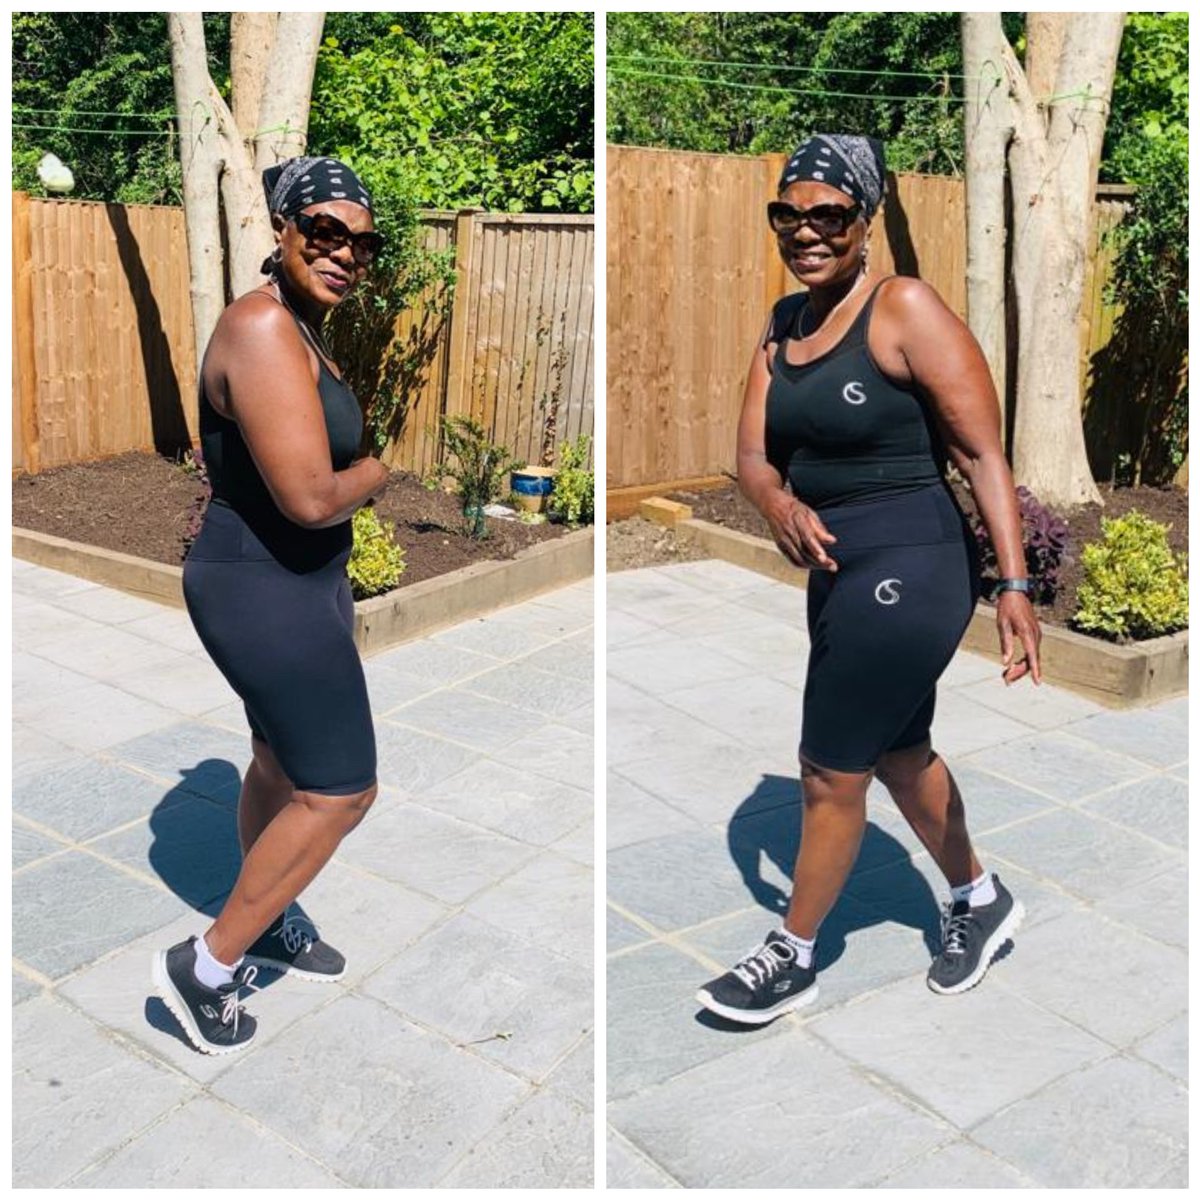 What a wonderful lady! Would you believe that she's 58 young & has just finished her workout rocking shorts and vet set from our ClassicFit range!
Thank you Viola for sending these lovely photos. Keep up the good work.
#plussizefitwear #beautyisnotasize
#beautyhasnoweightlimit